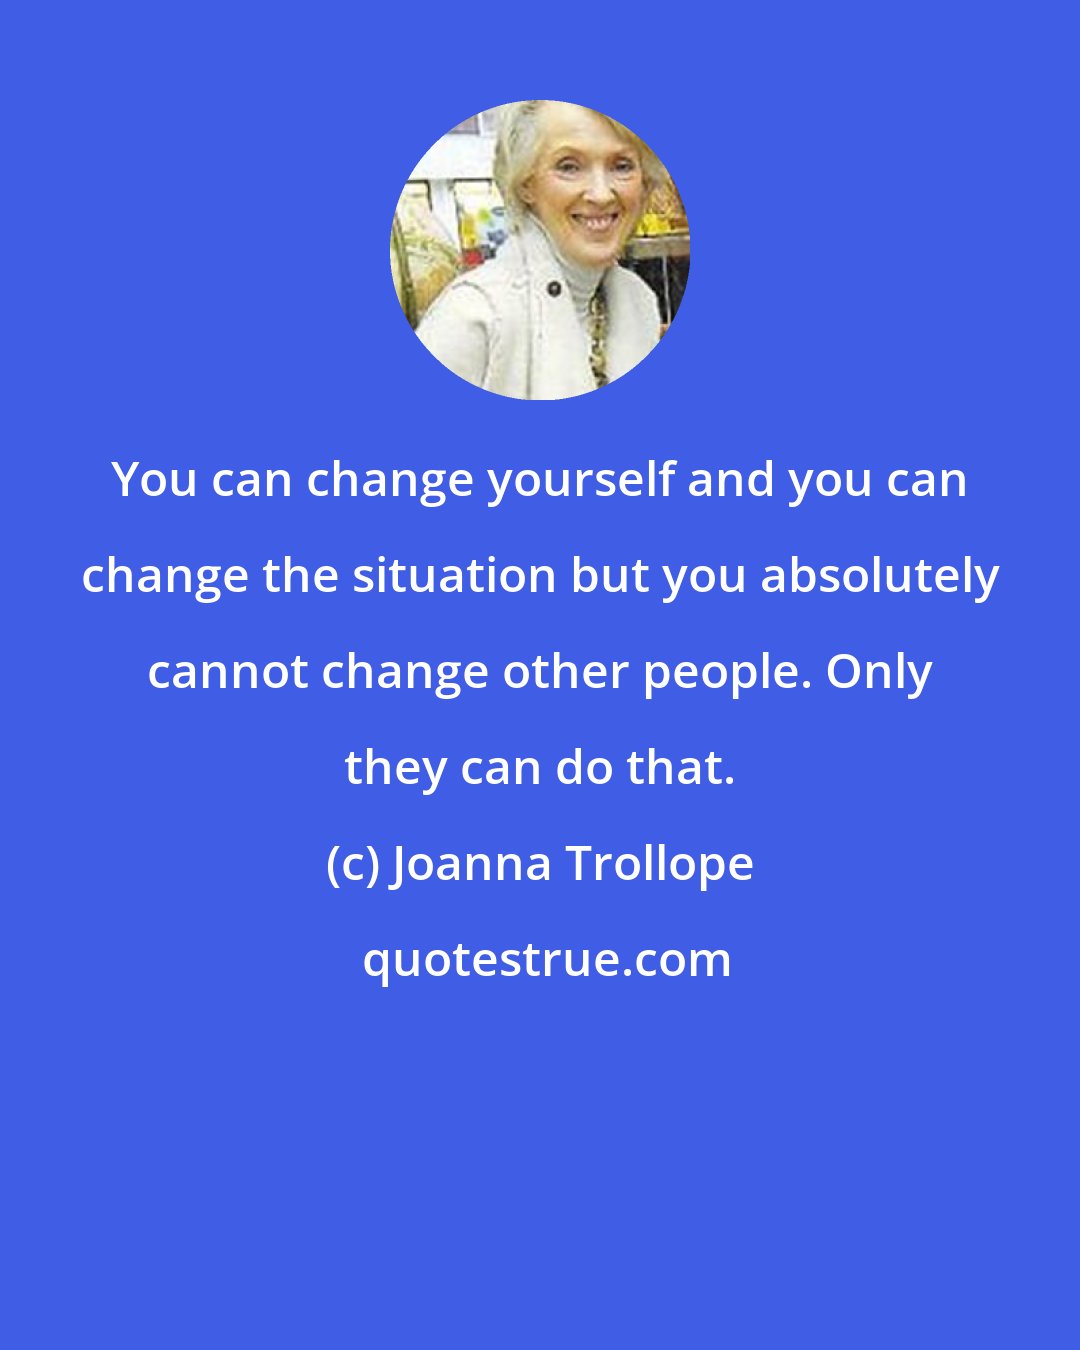 Joanna Trollope: You can change yourself and you can change the situation but you absolutely cannot change other people. Only they can do that.